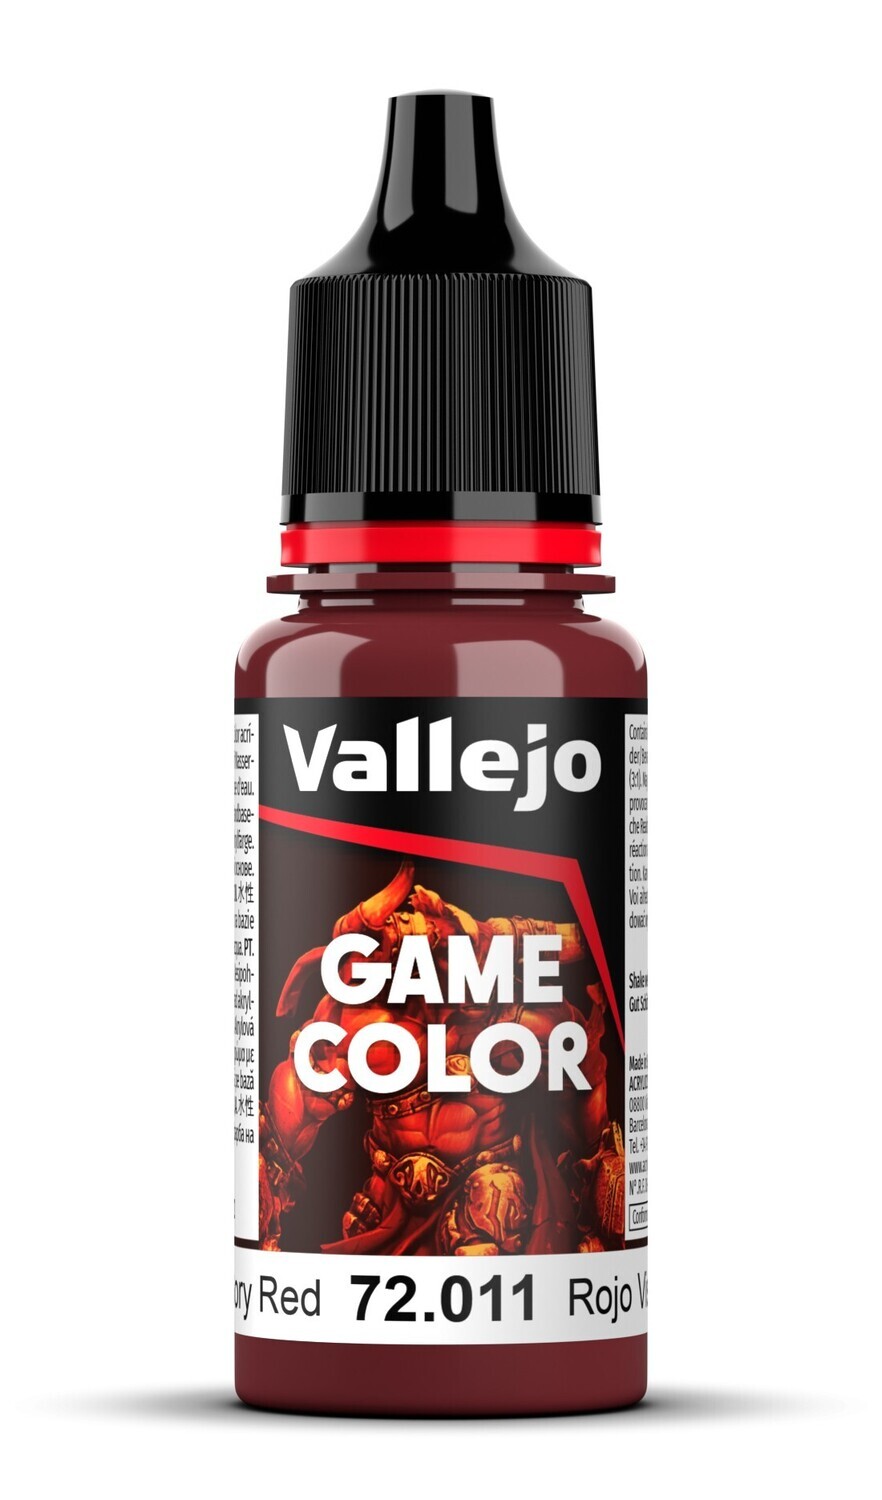 Gory Red - Game Color Farbe - Vallejo